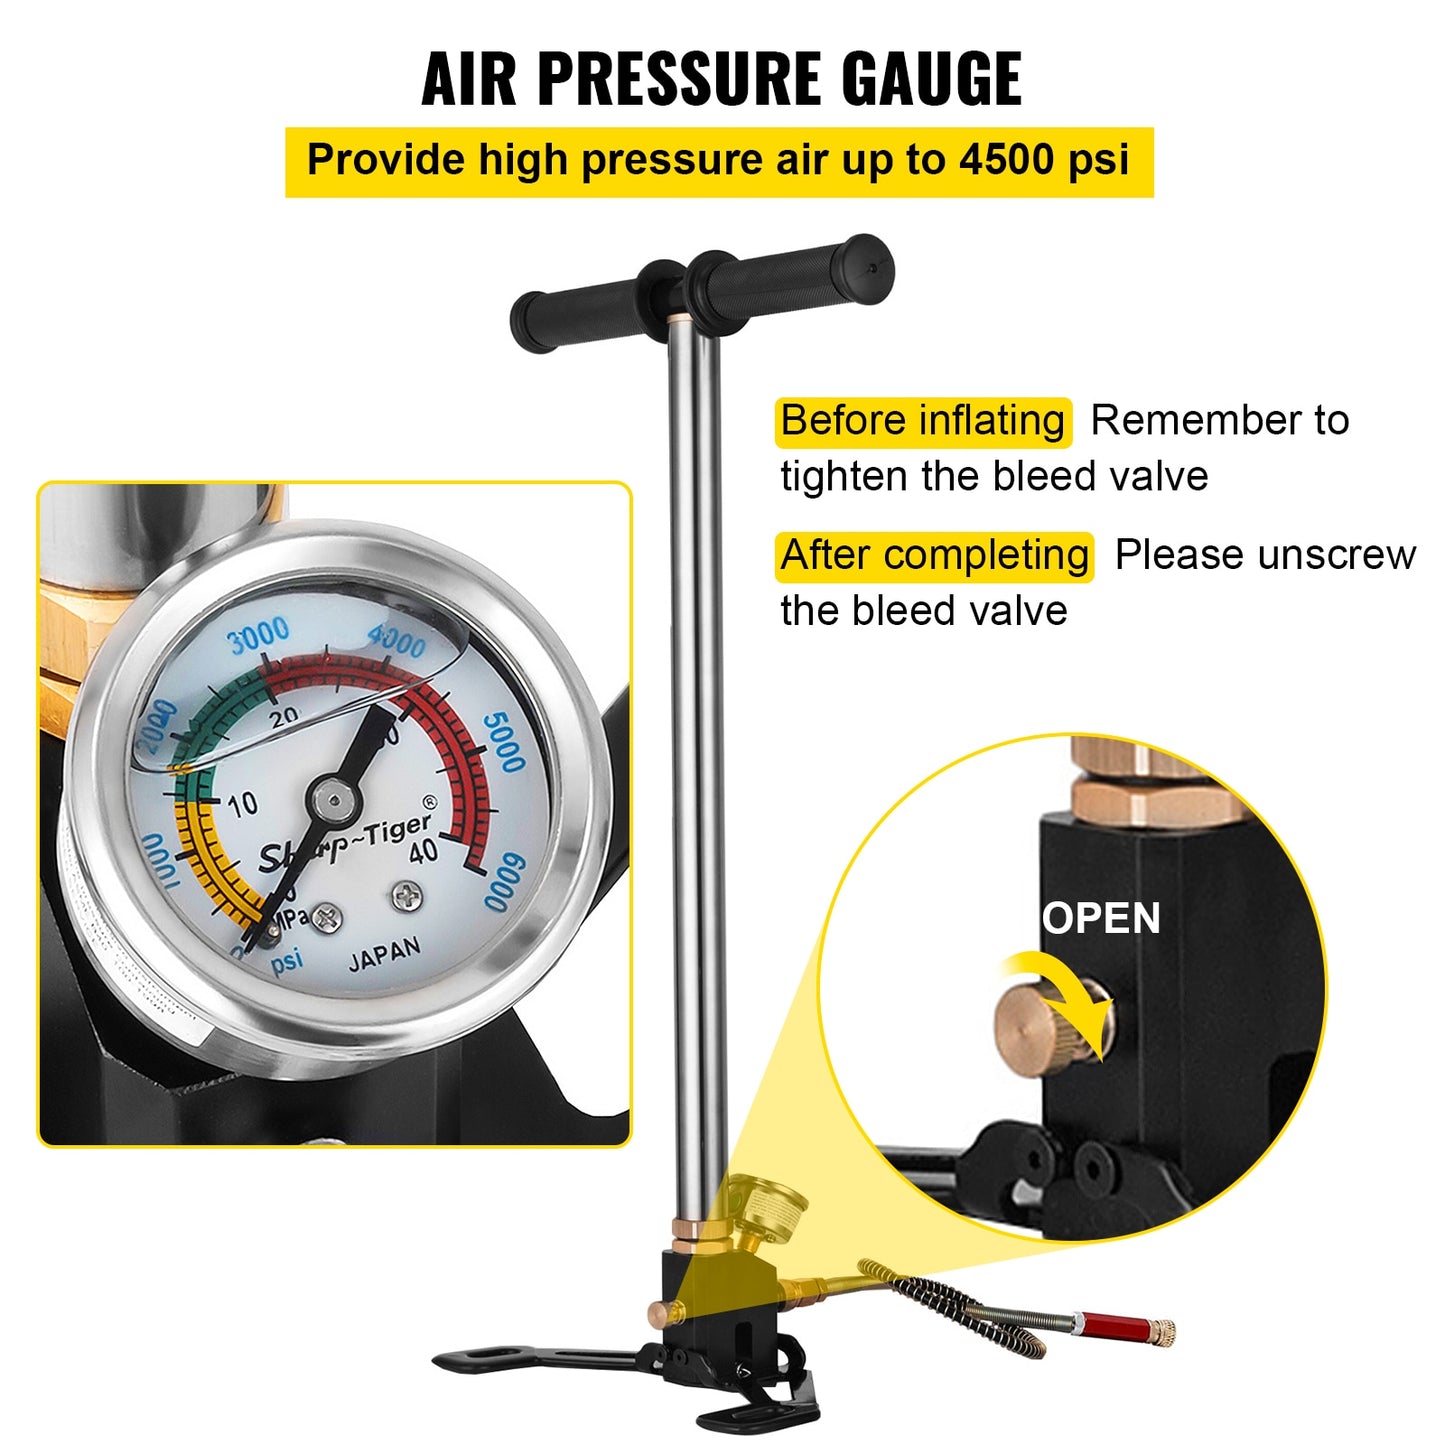 3-Stage PCP Pump with 4500PSI Pressure Gauge - Versatile High-Pressure Hand Pump for Tire, Kayak, Ball, and Air Gun Filling